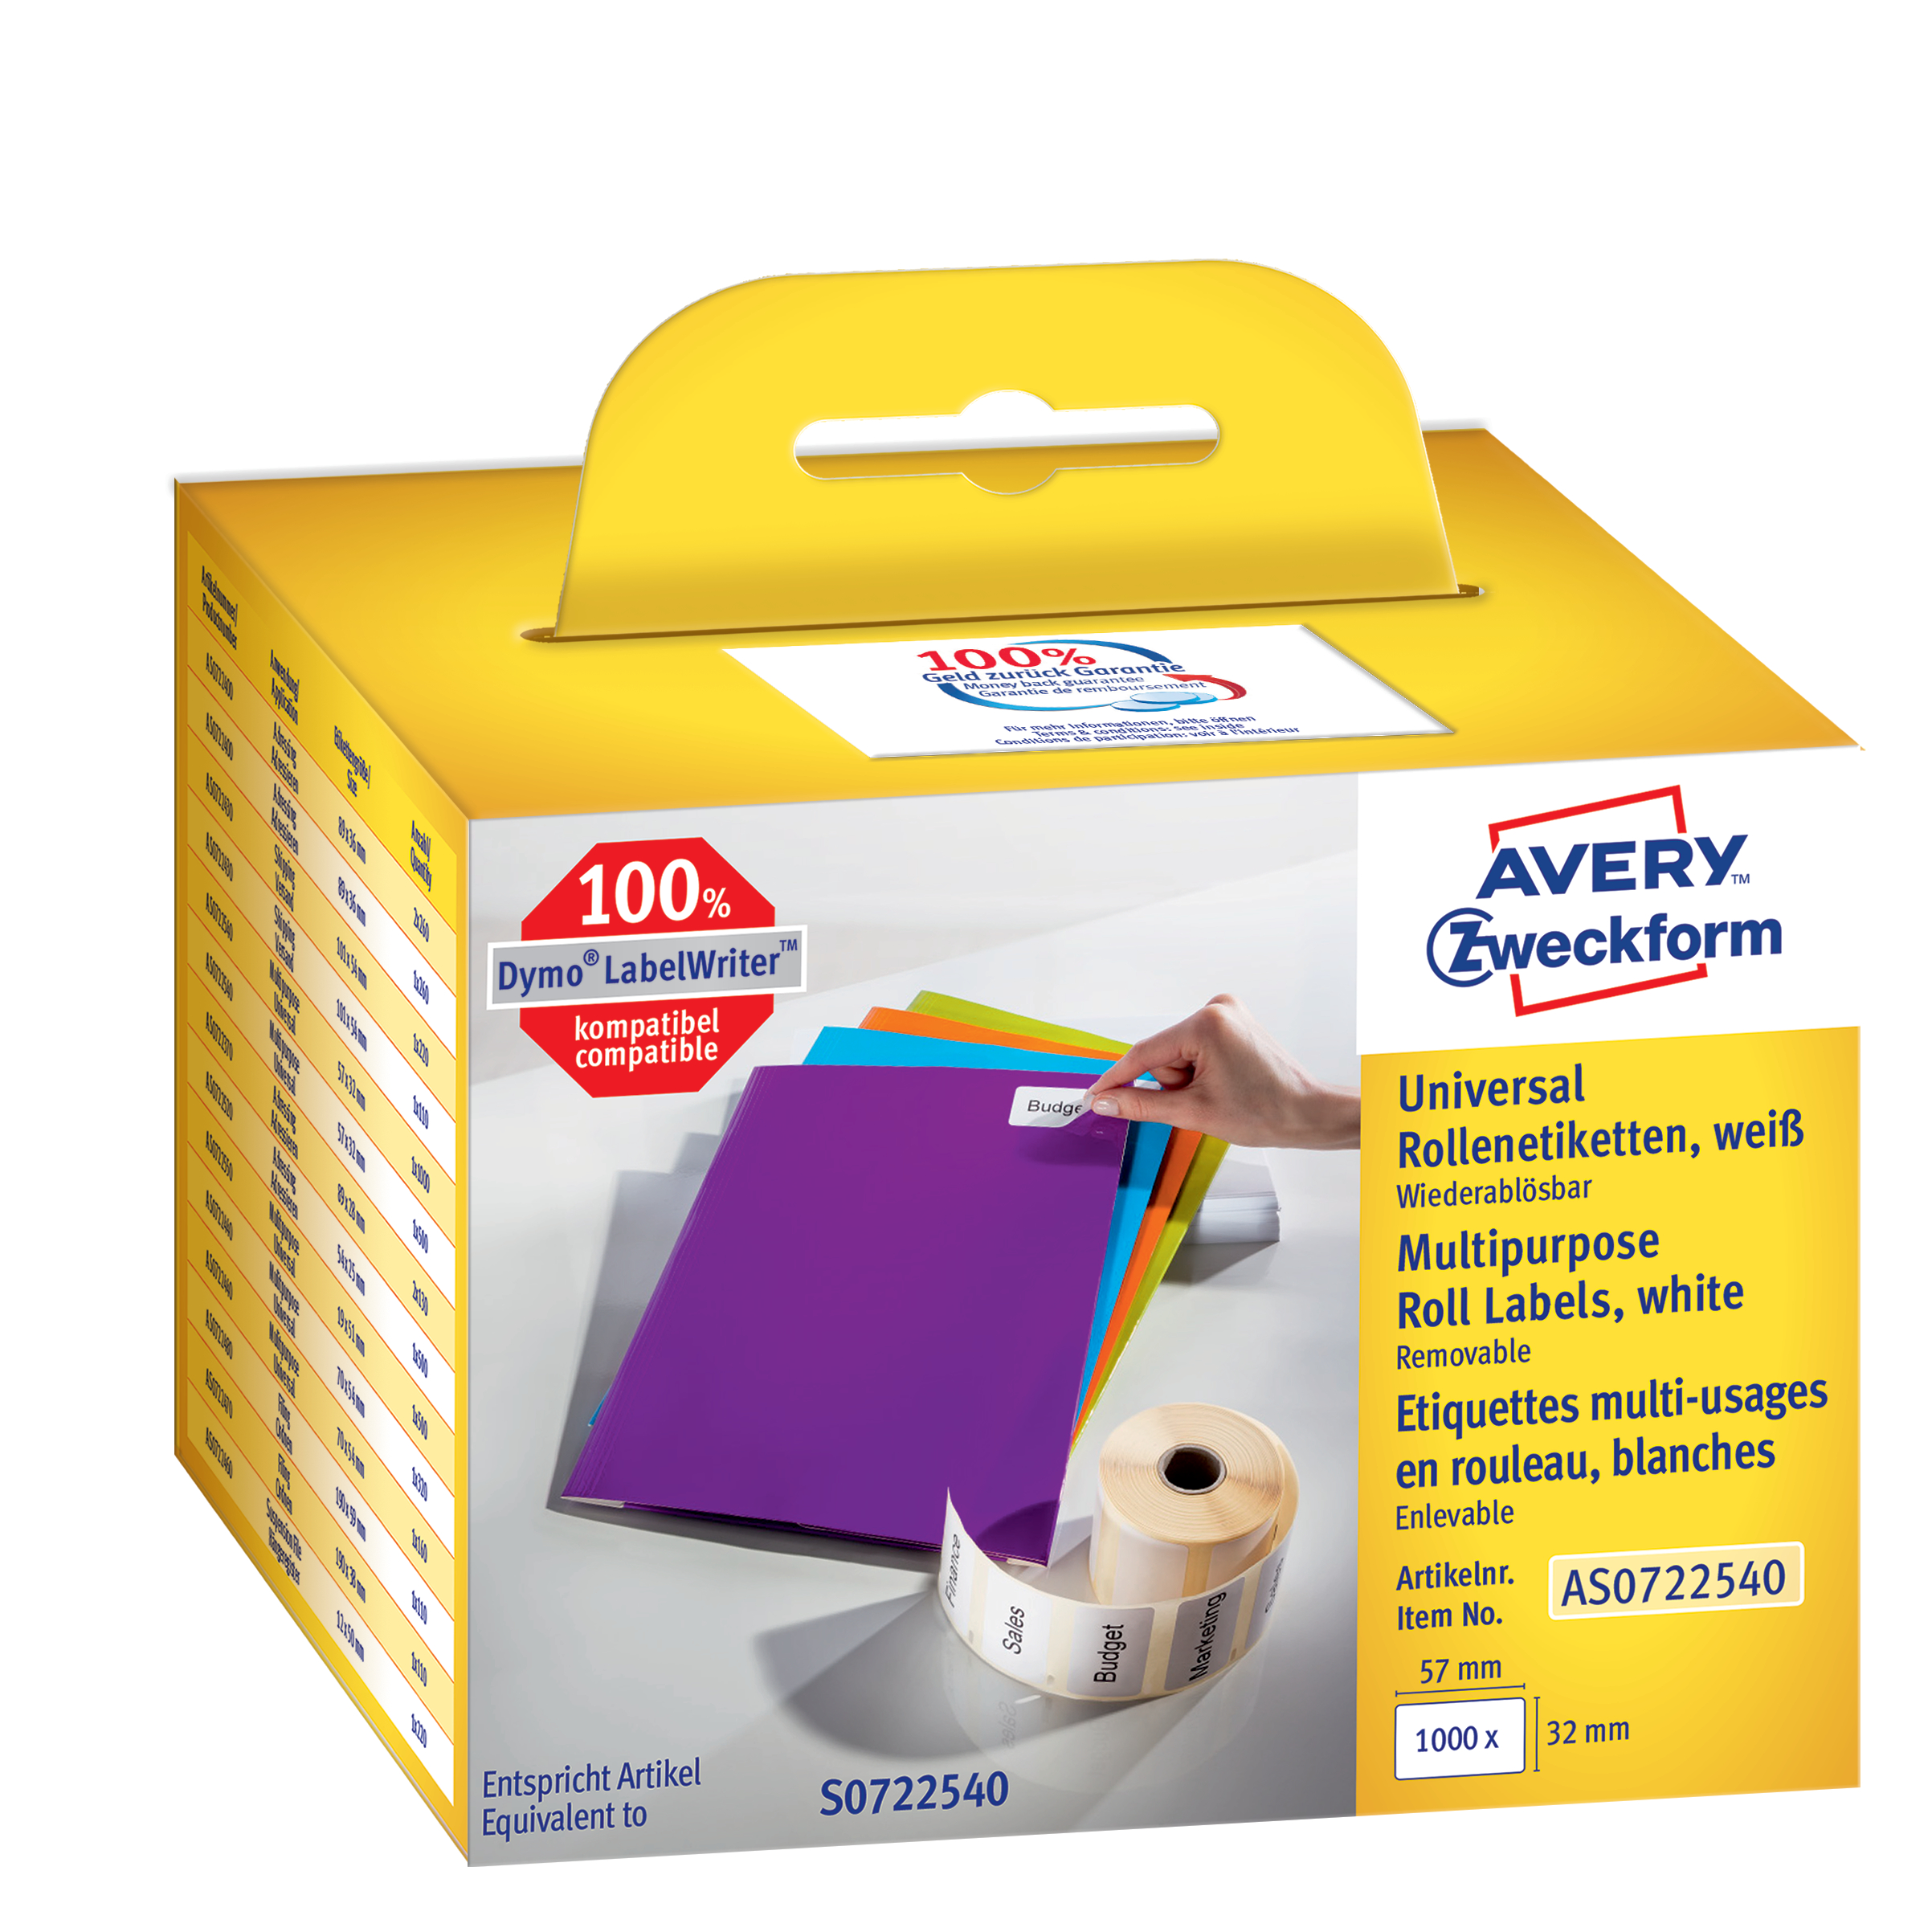 AVERY ZWECKFORM Etiquettes universell. 57x32mm AS0722540 blanc, rouleau 1000 pcs. blanc, rouleau 100